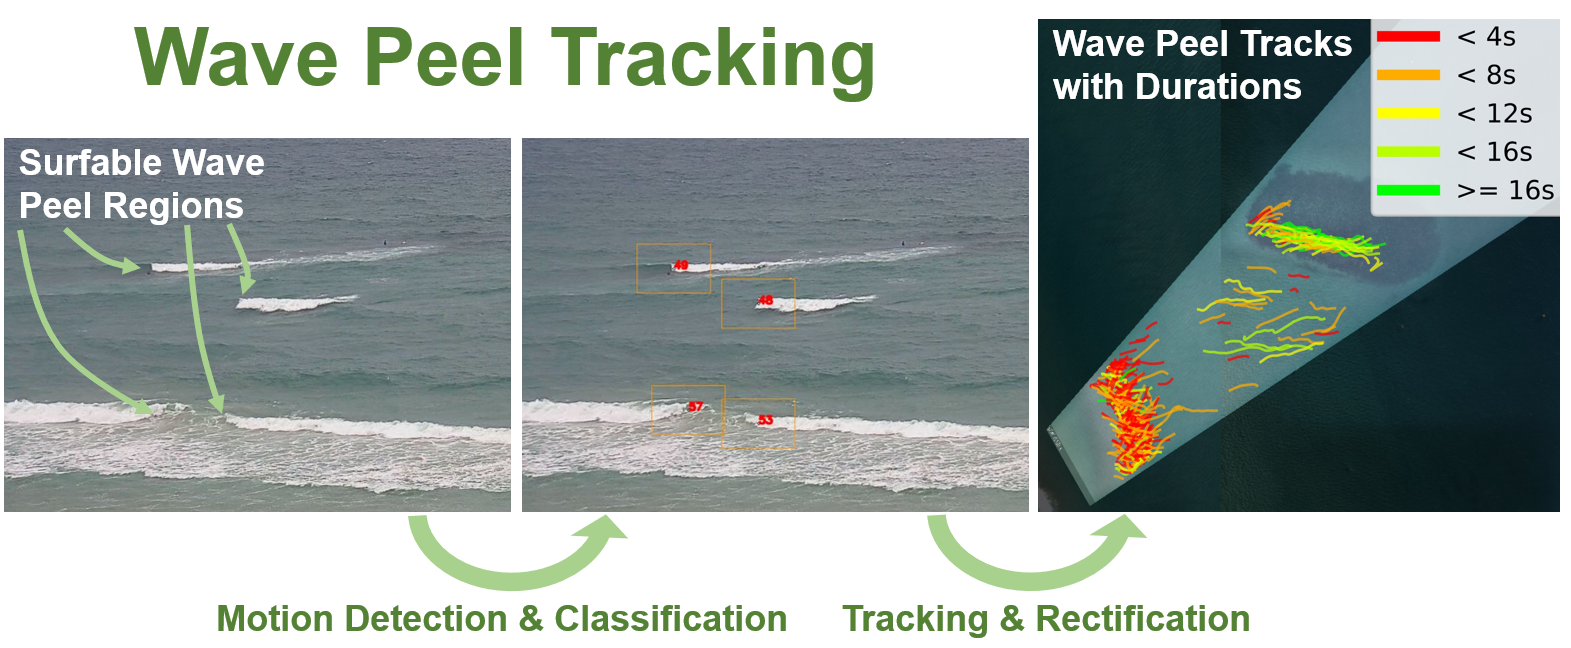 Remote Sensing | Free Full-Text | Wave Peel Tracking: A New Approach for  Assessing Surf Amenity and Analysis of Breaking Waves | HTML